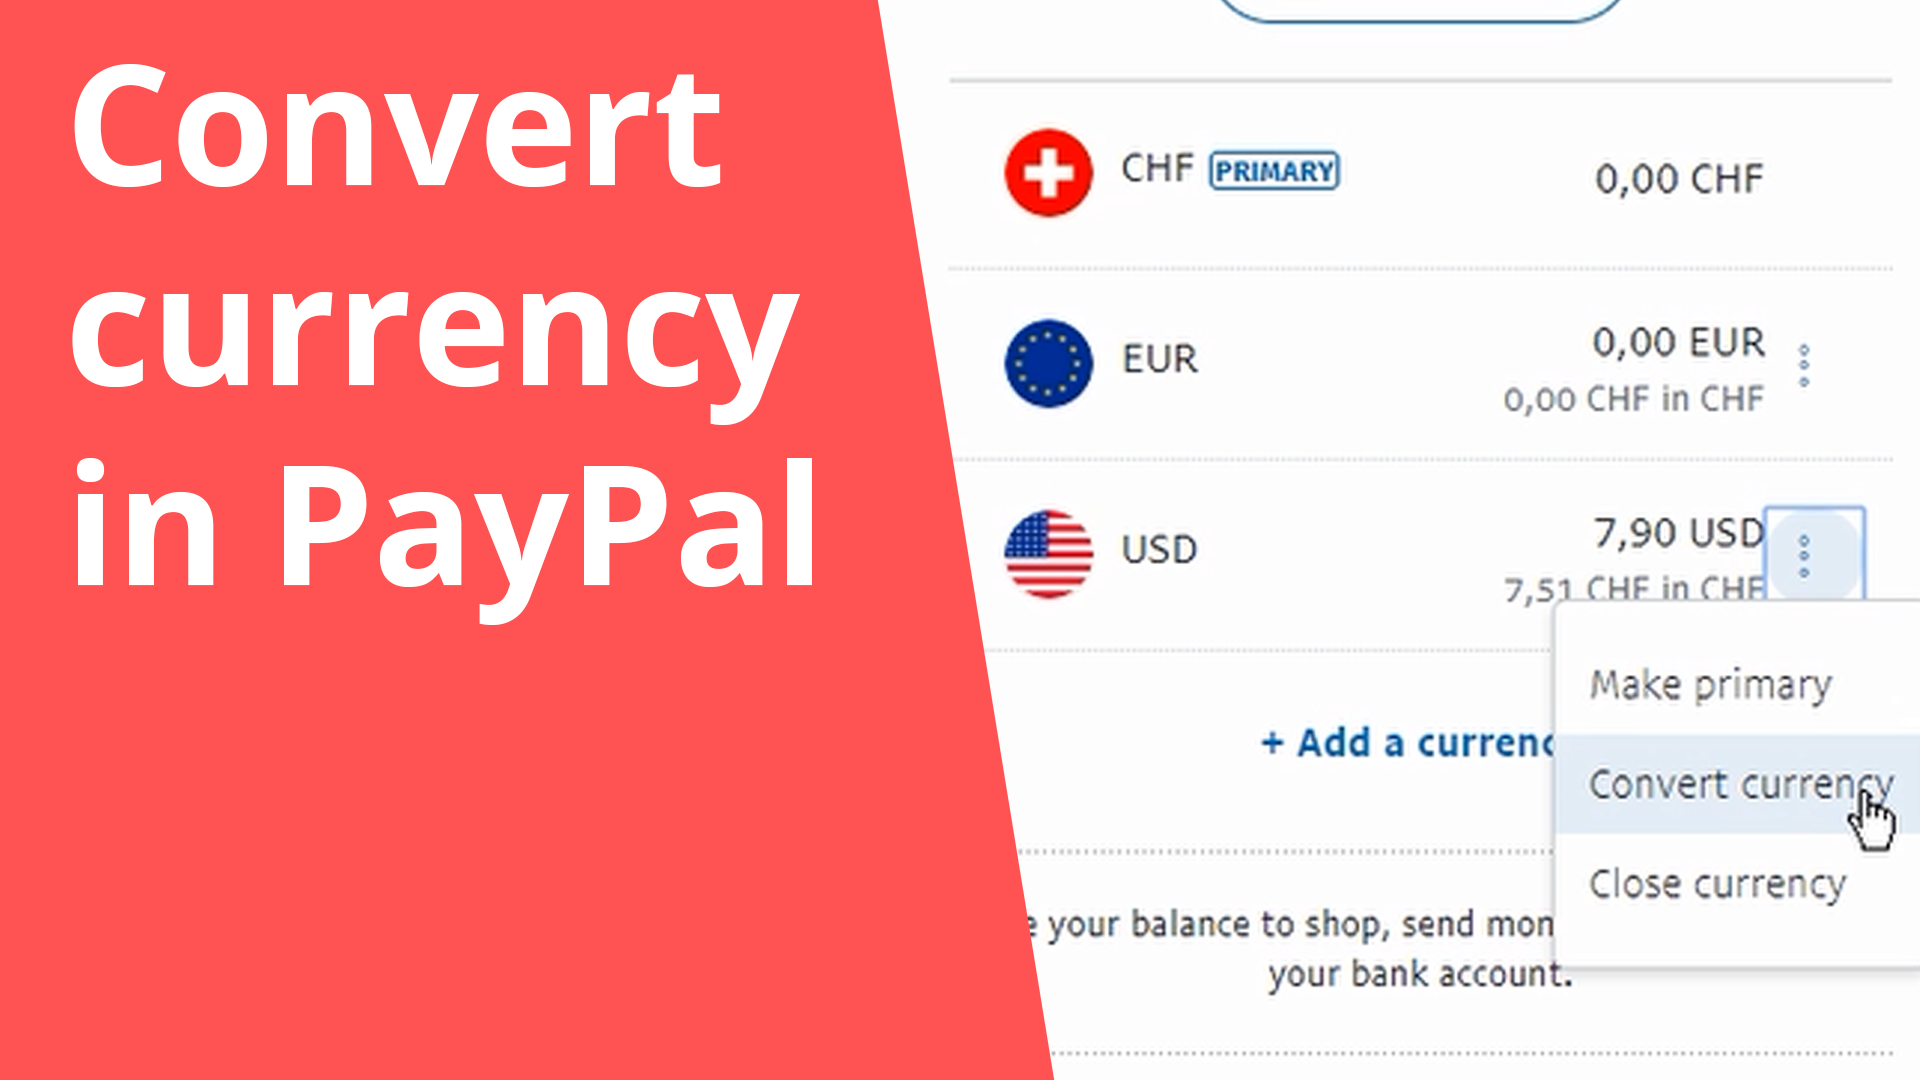 Convert currency in PayPal